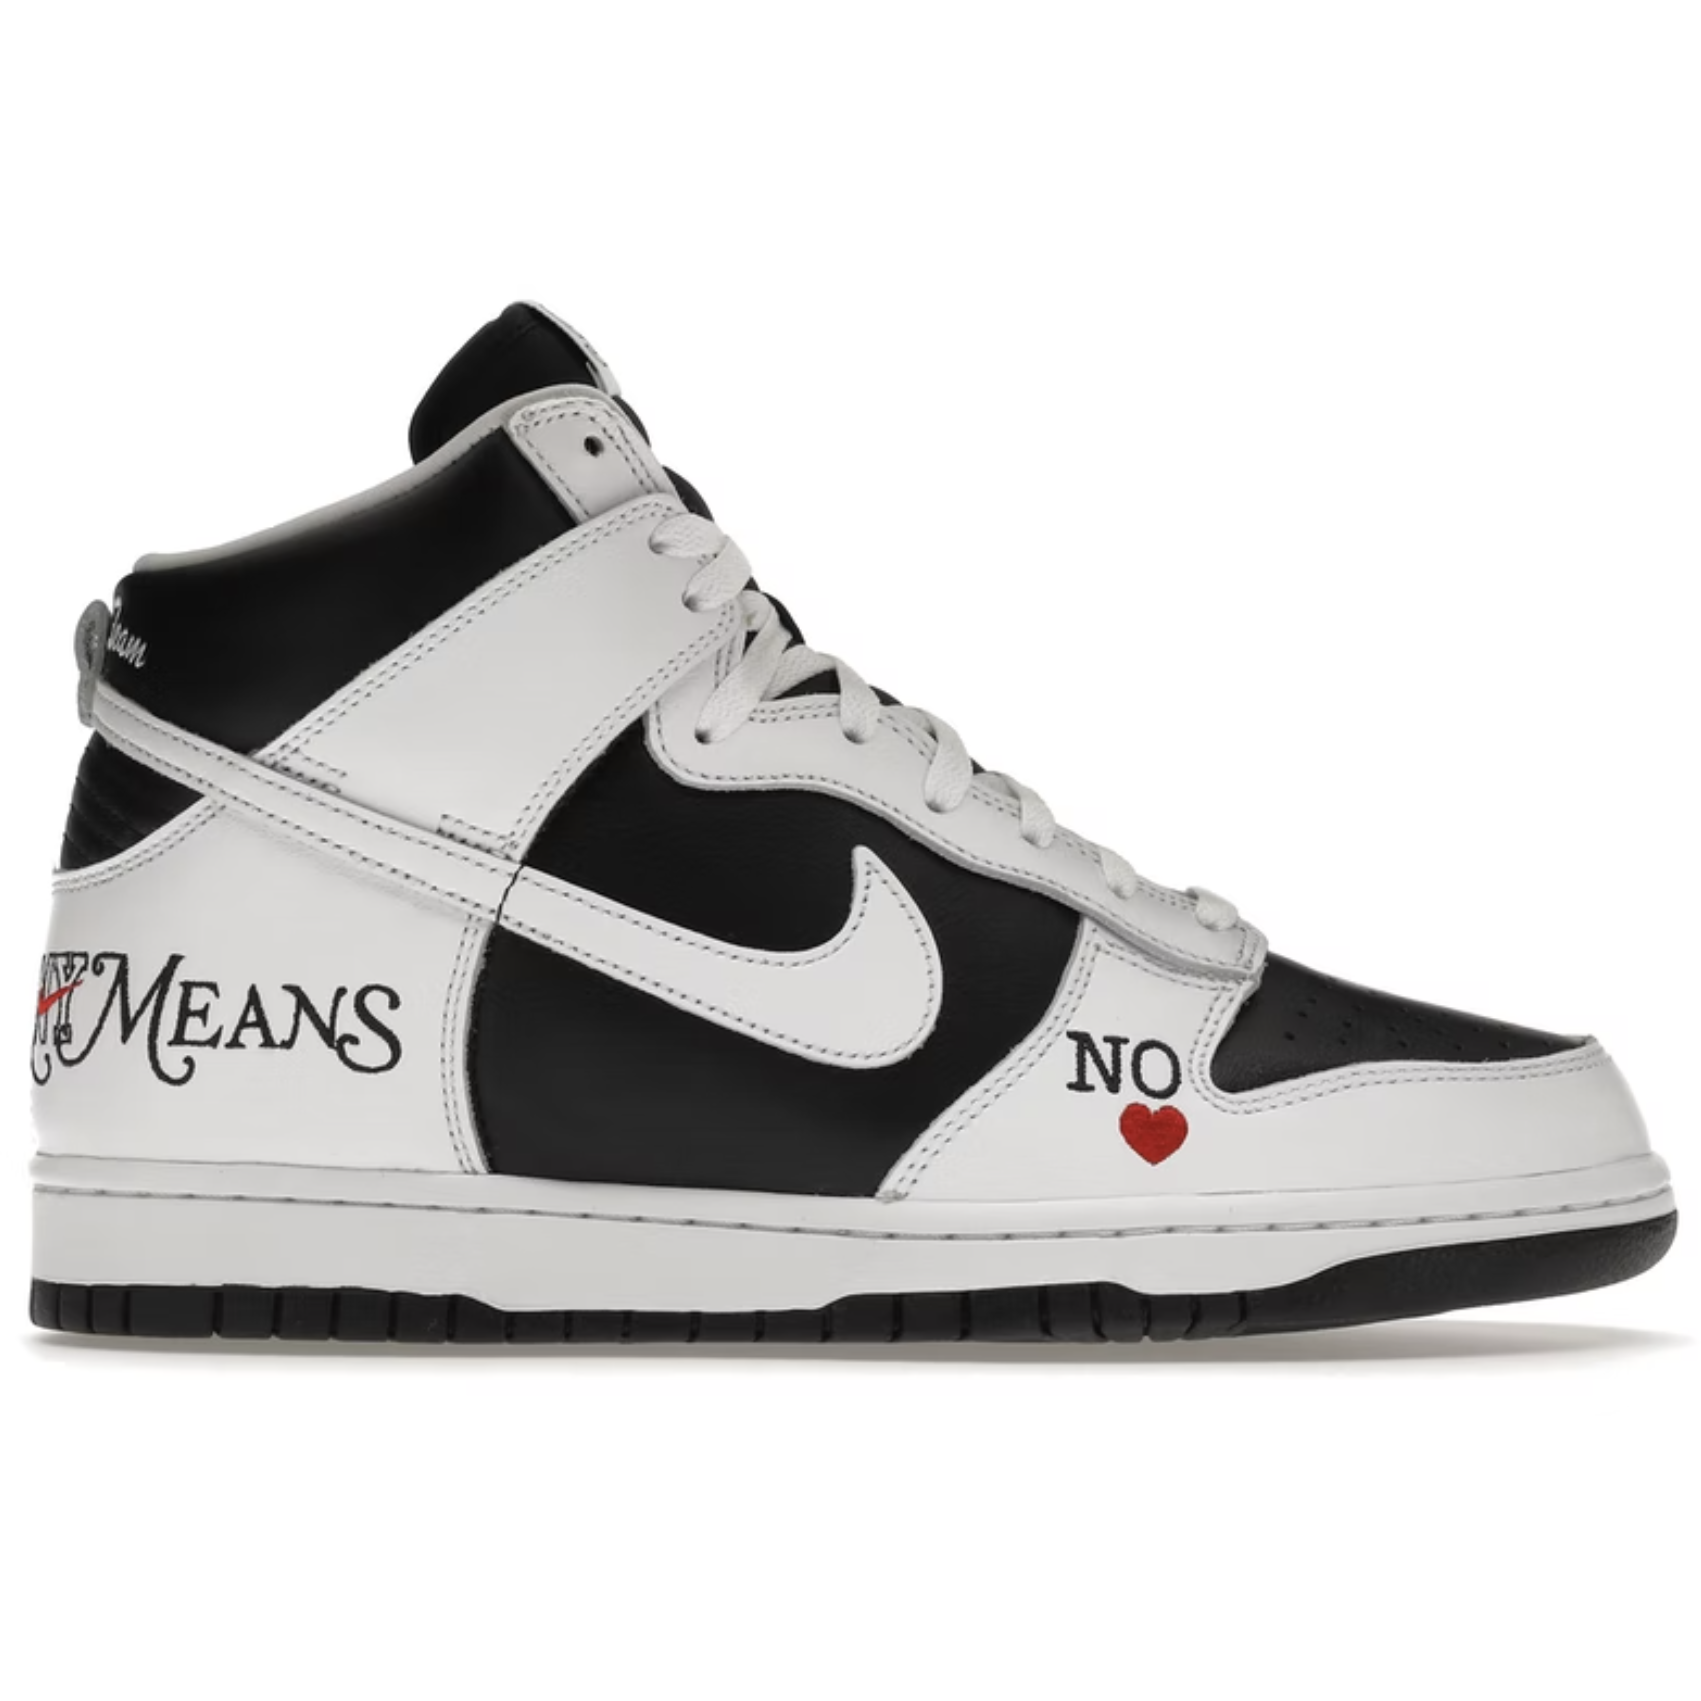 Nike SB Dunk High Supreme By Any Means Black from Nike